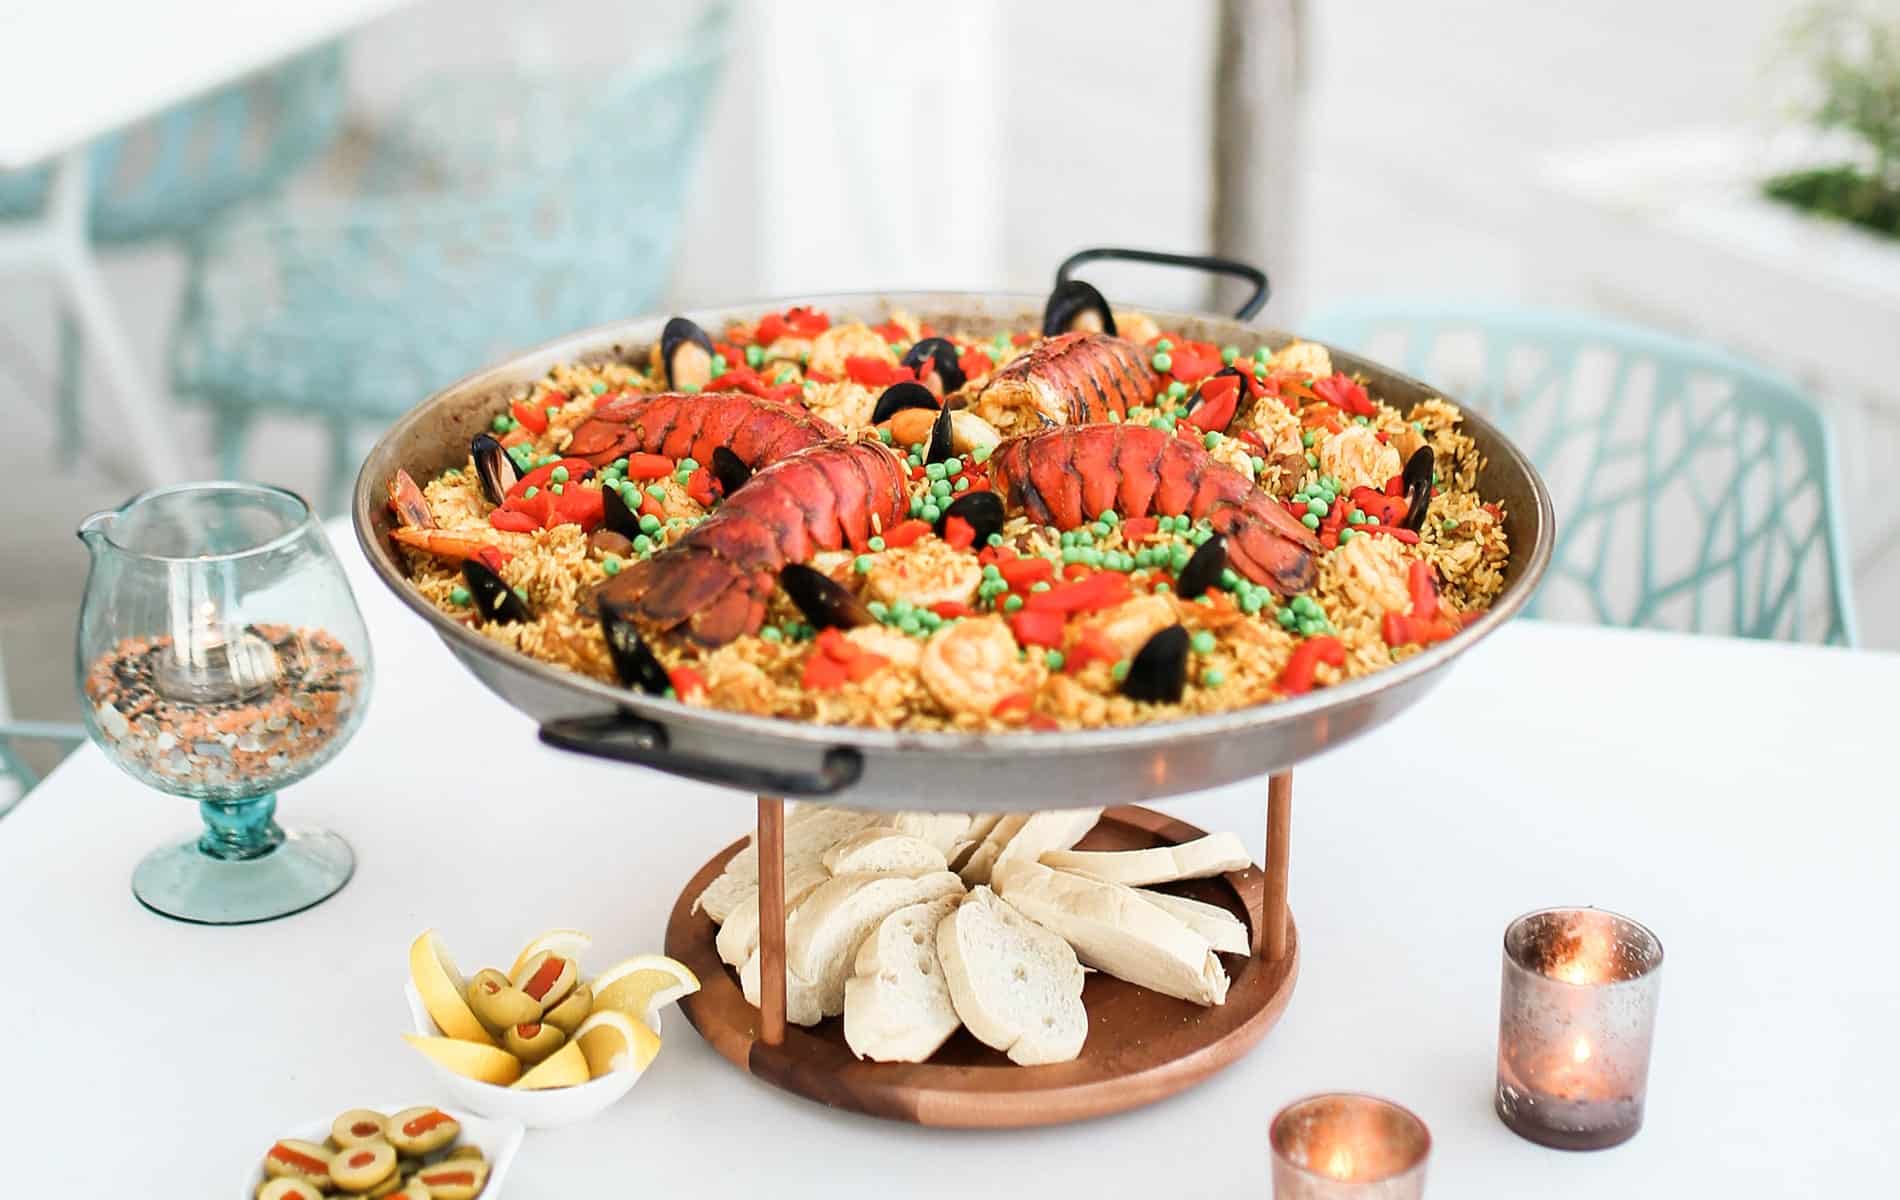 Joyce Russell, Paella Queen, 45 Central, Brenna Kneiss Photo Co.